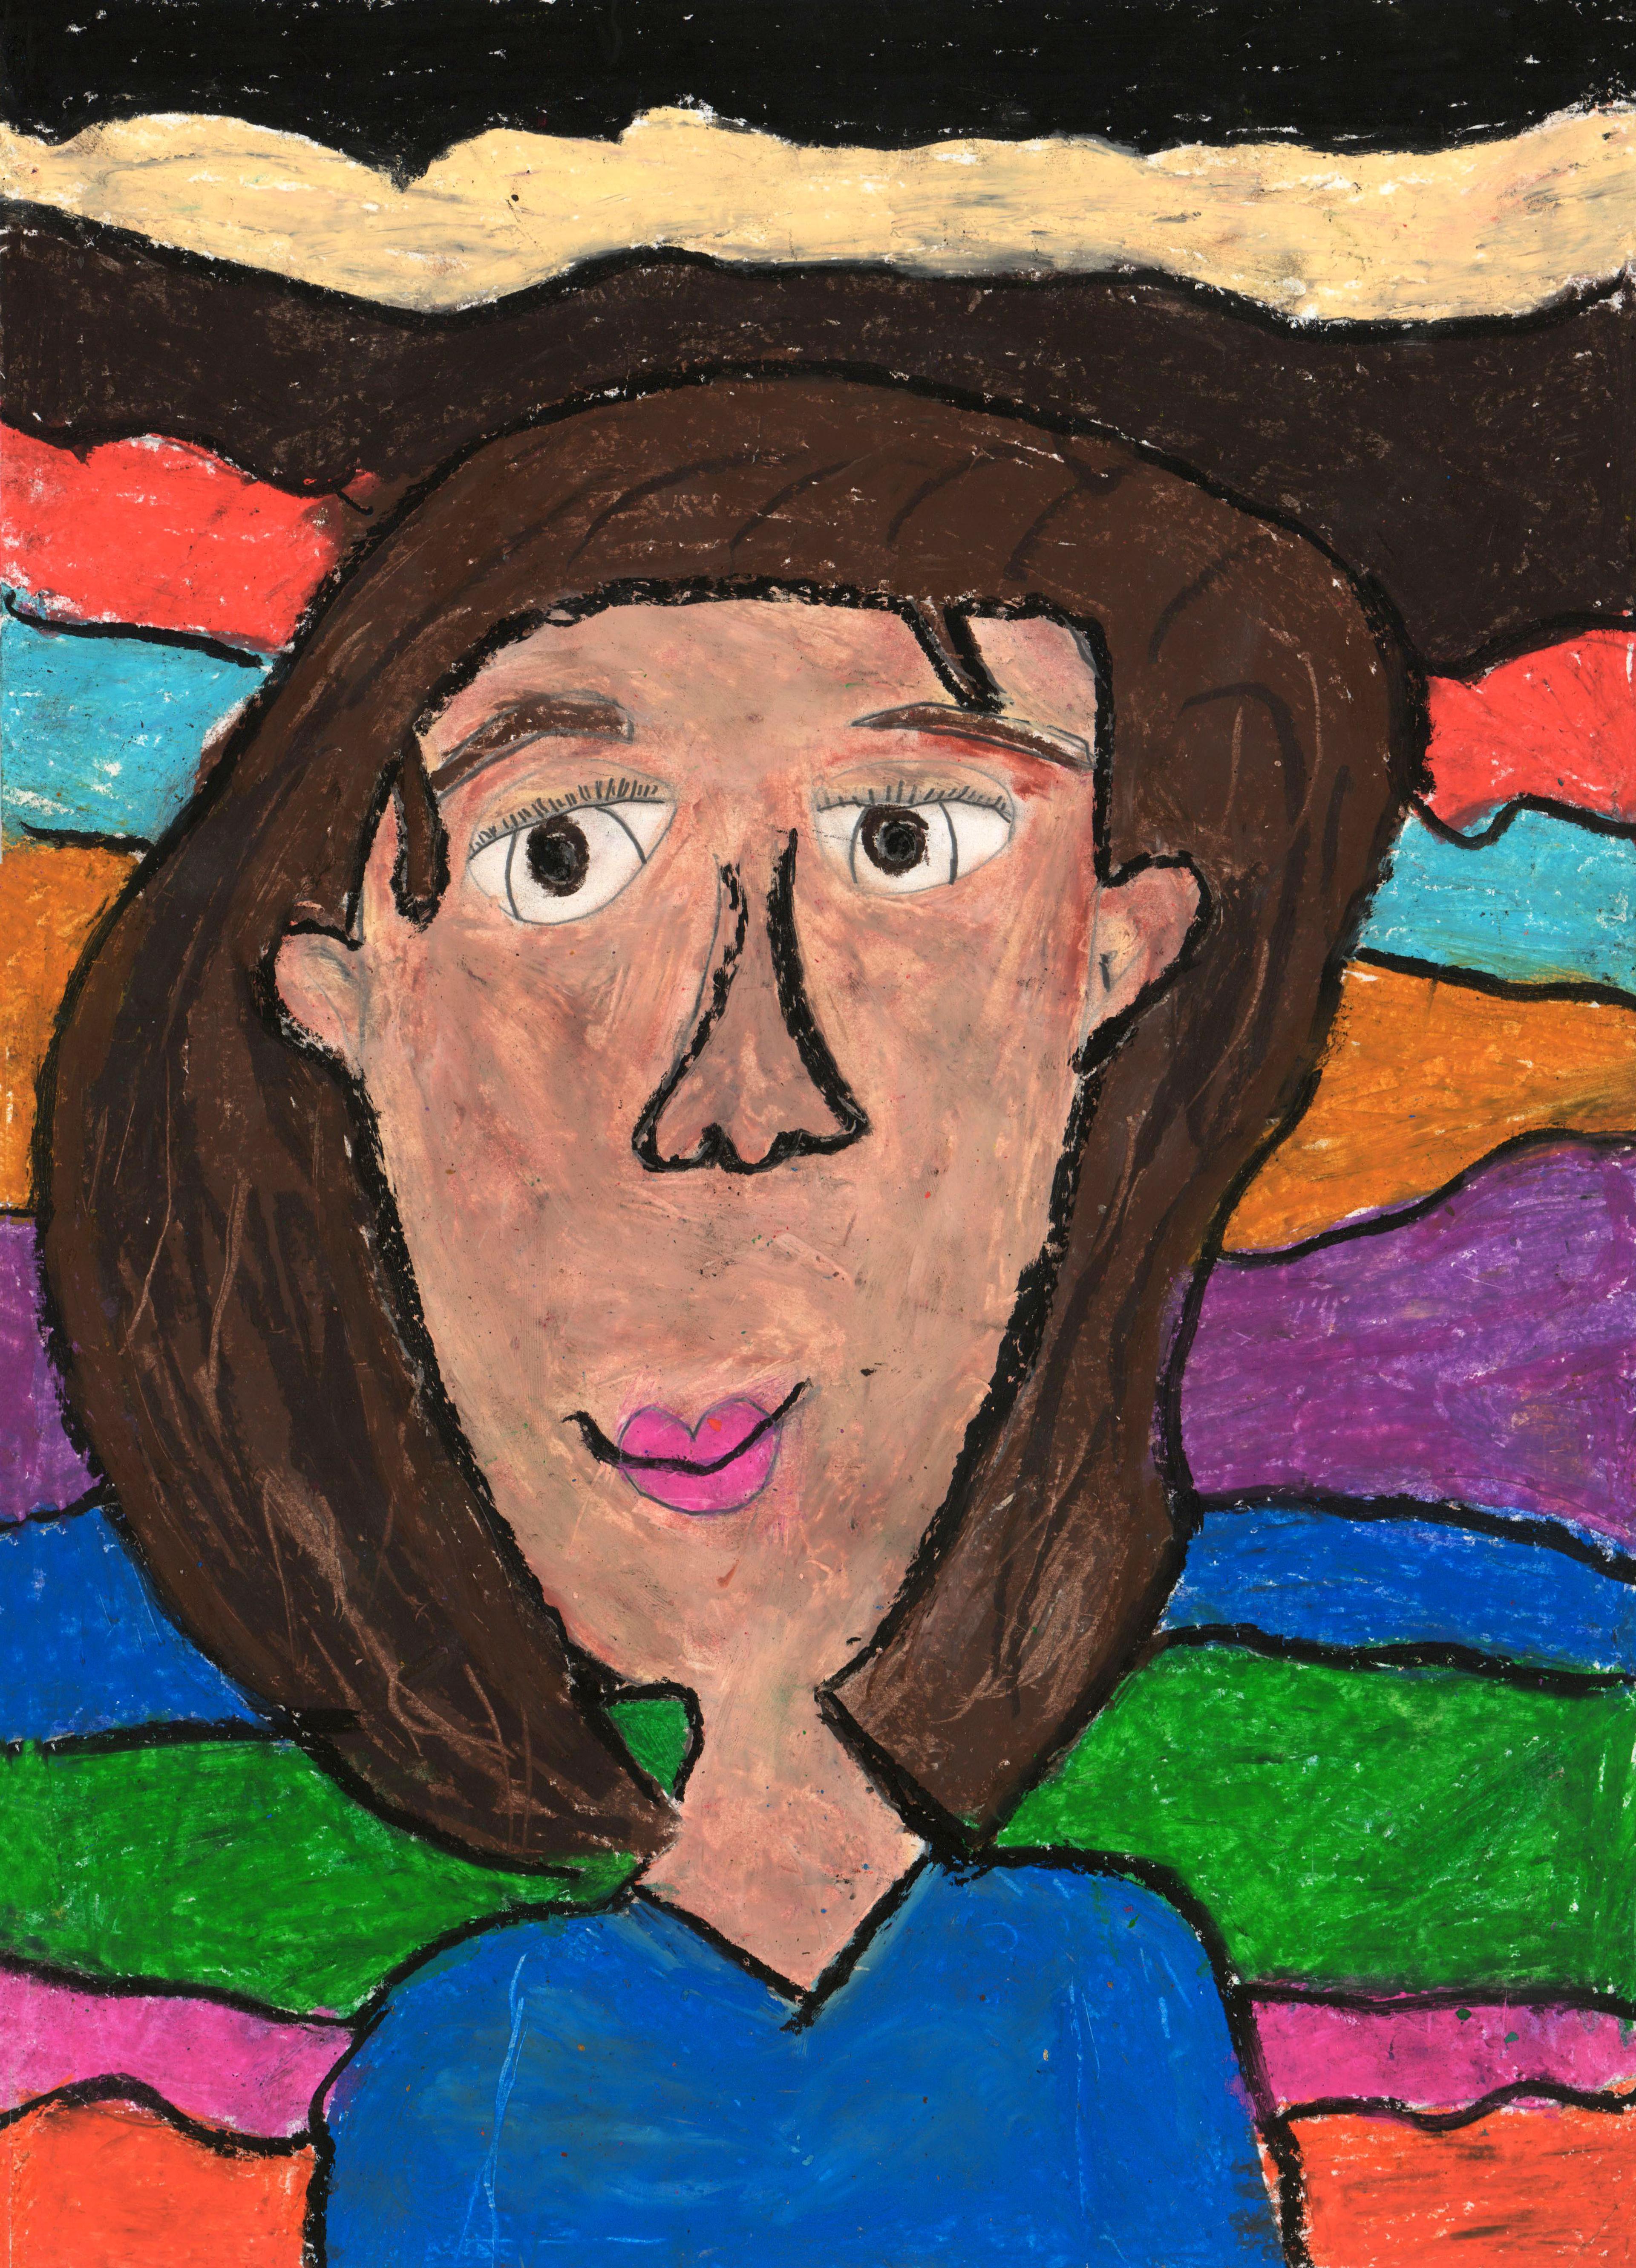 Oil pastel self-portrait of a young, light-skinned girl with shoulder length brown hair. The girl faces the viewer. She has large brown eyes and pink lips curved in a slight smile. She wears a blue V-necked shirt and stands in front of ascending horizontal bars, changing colors from orange to pink, green, blue, purple, orange, teal, red, dark brown, light brown, and then finally to black. The elements in the drawing are outlined in thick black strokes.